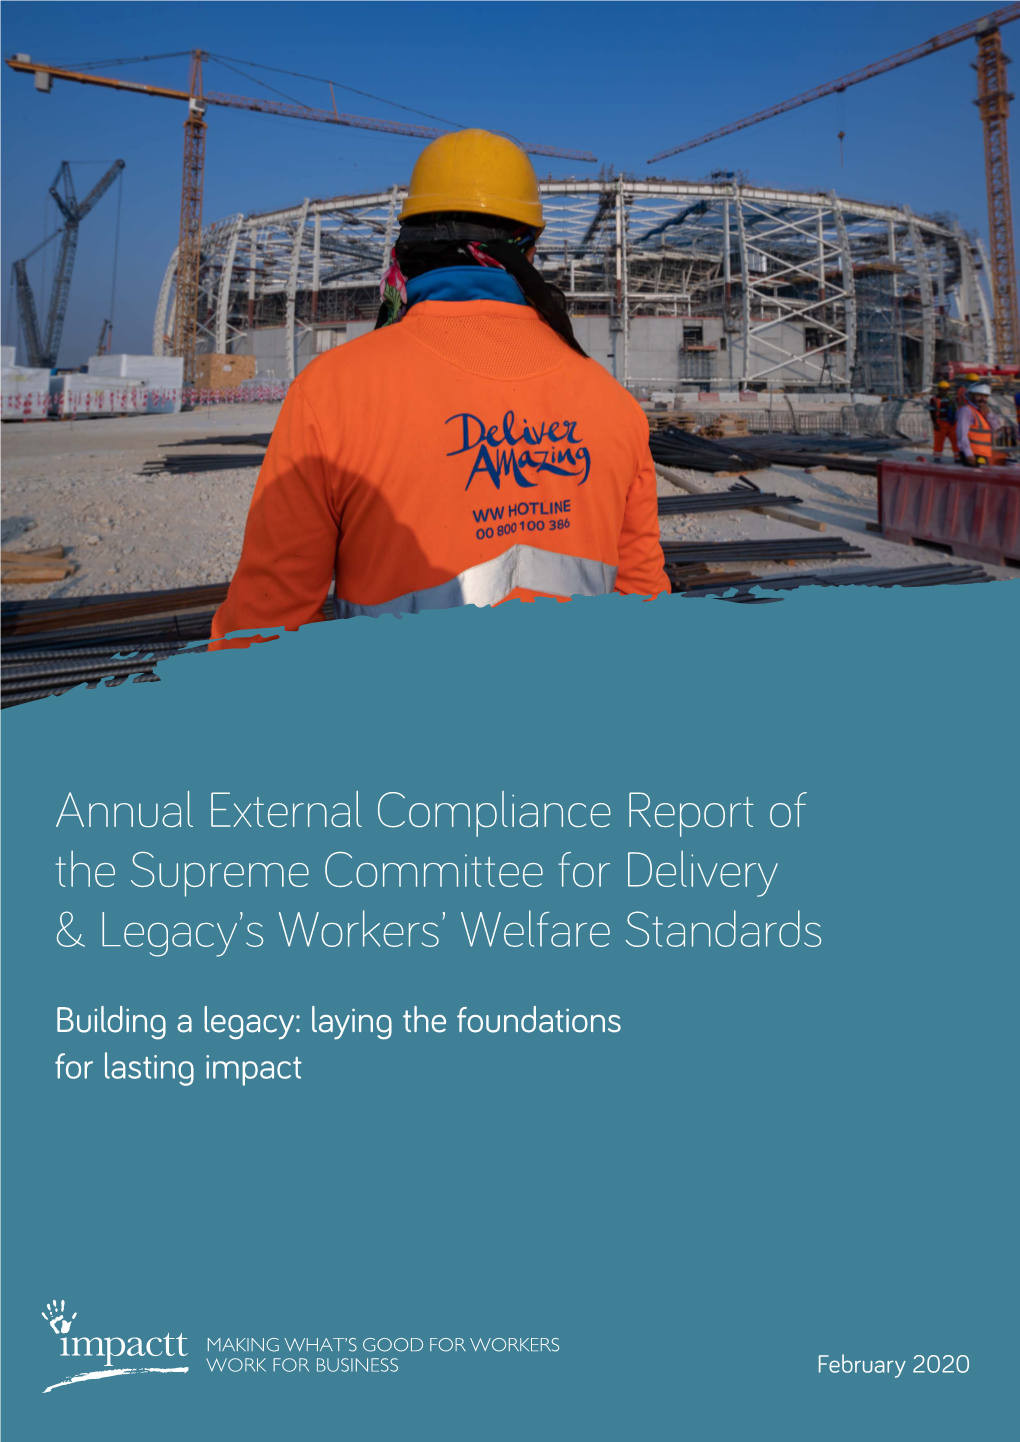 Annual External Compliance Report of the Supreme Committee for Delivery & Le Acy’S Workers’ Welfare Standards